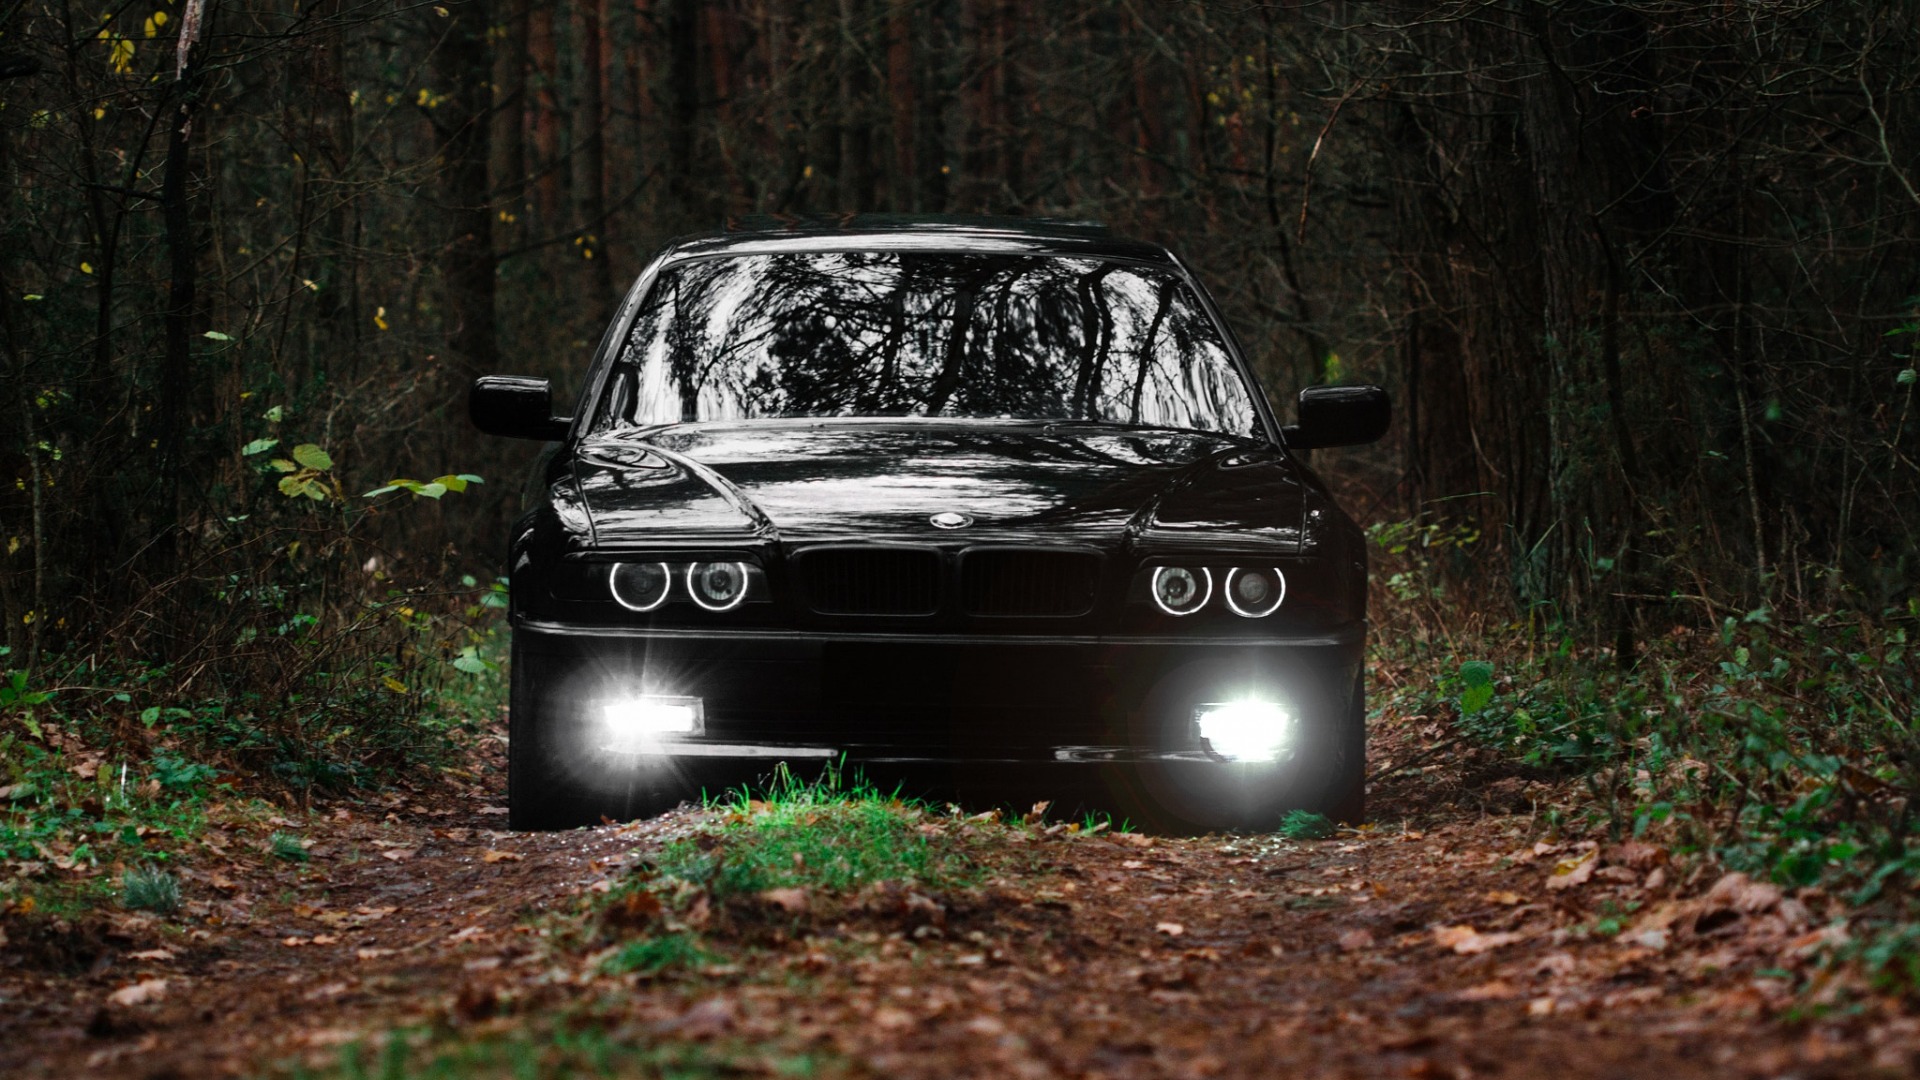 General 1920x1080 car BMW forest frontal view 7er German cars vehicle headlights black cars ground leaves trees